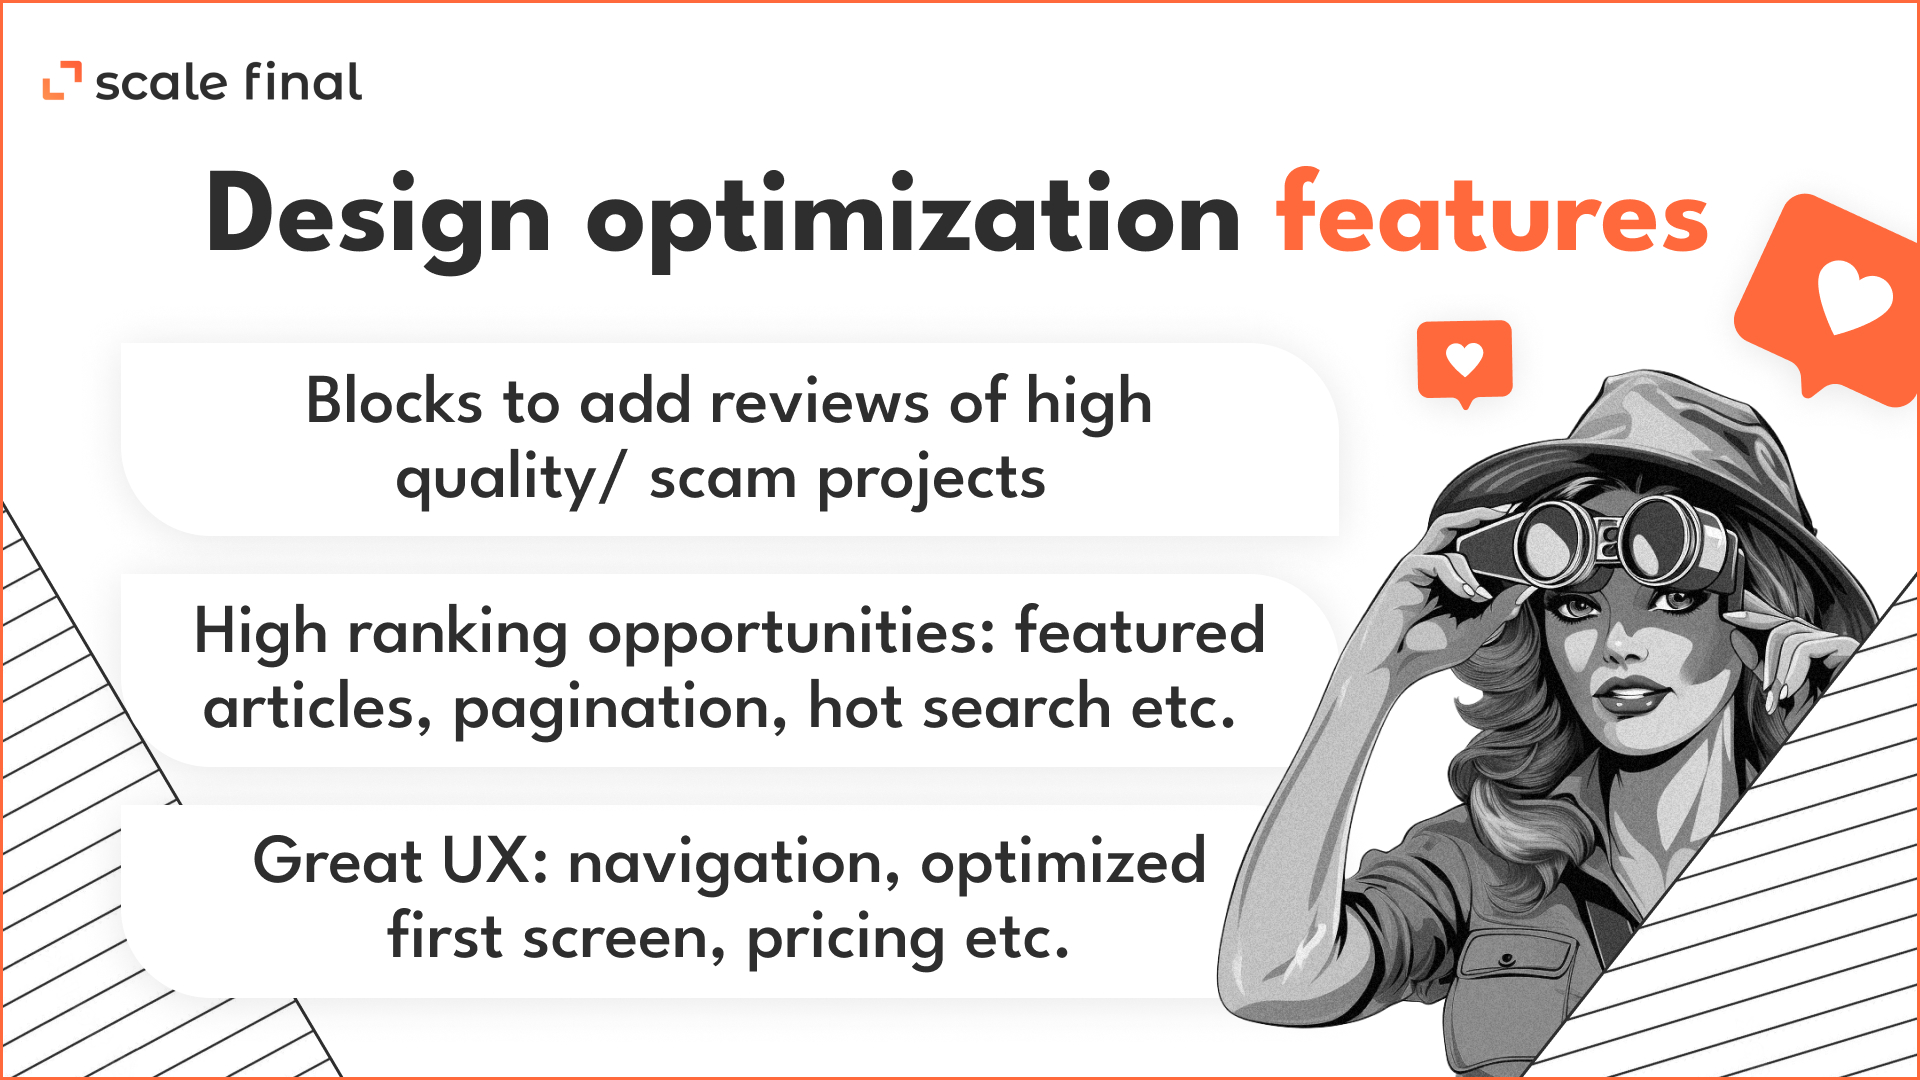 Design optimization features: Blocks to add reviews of high quality/ scam projects High ranking opportunities: featured articles, pagination, hot search etc. Great UX: navigation, optimized first screen, pricing etc. 